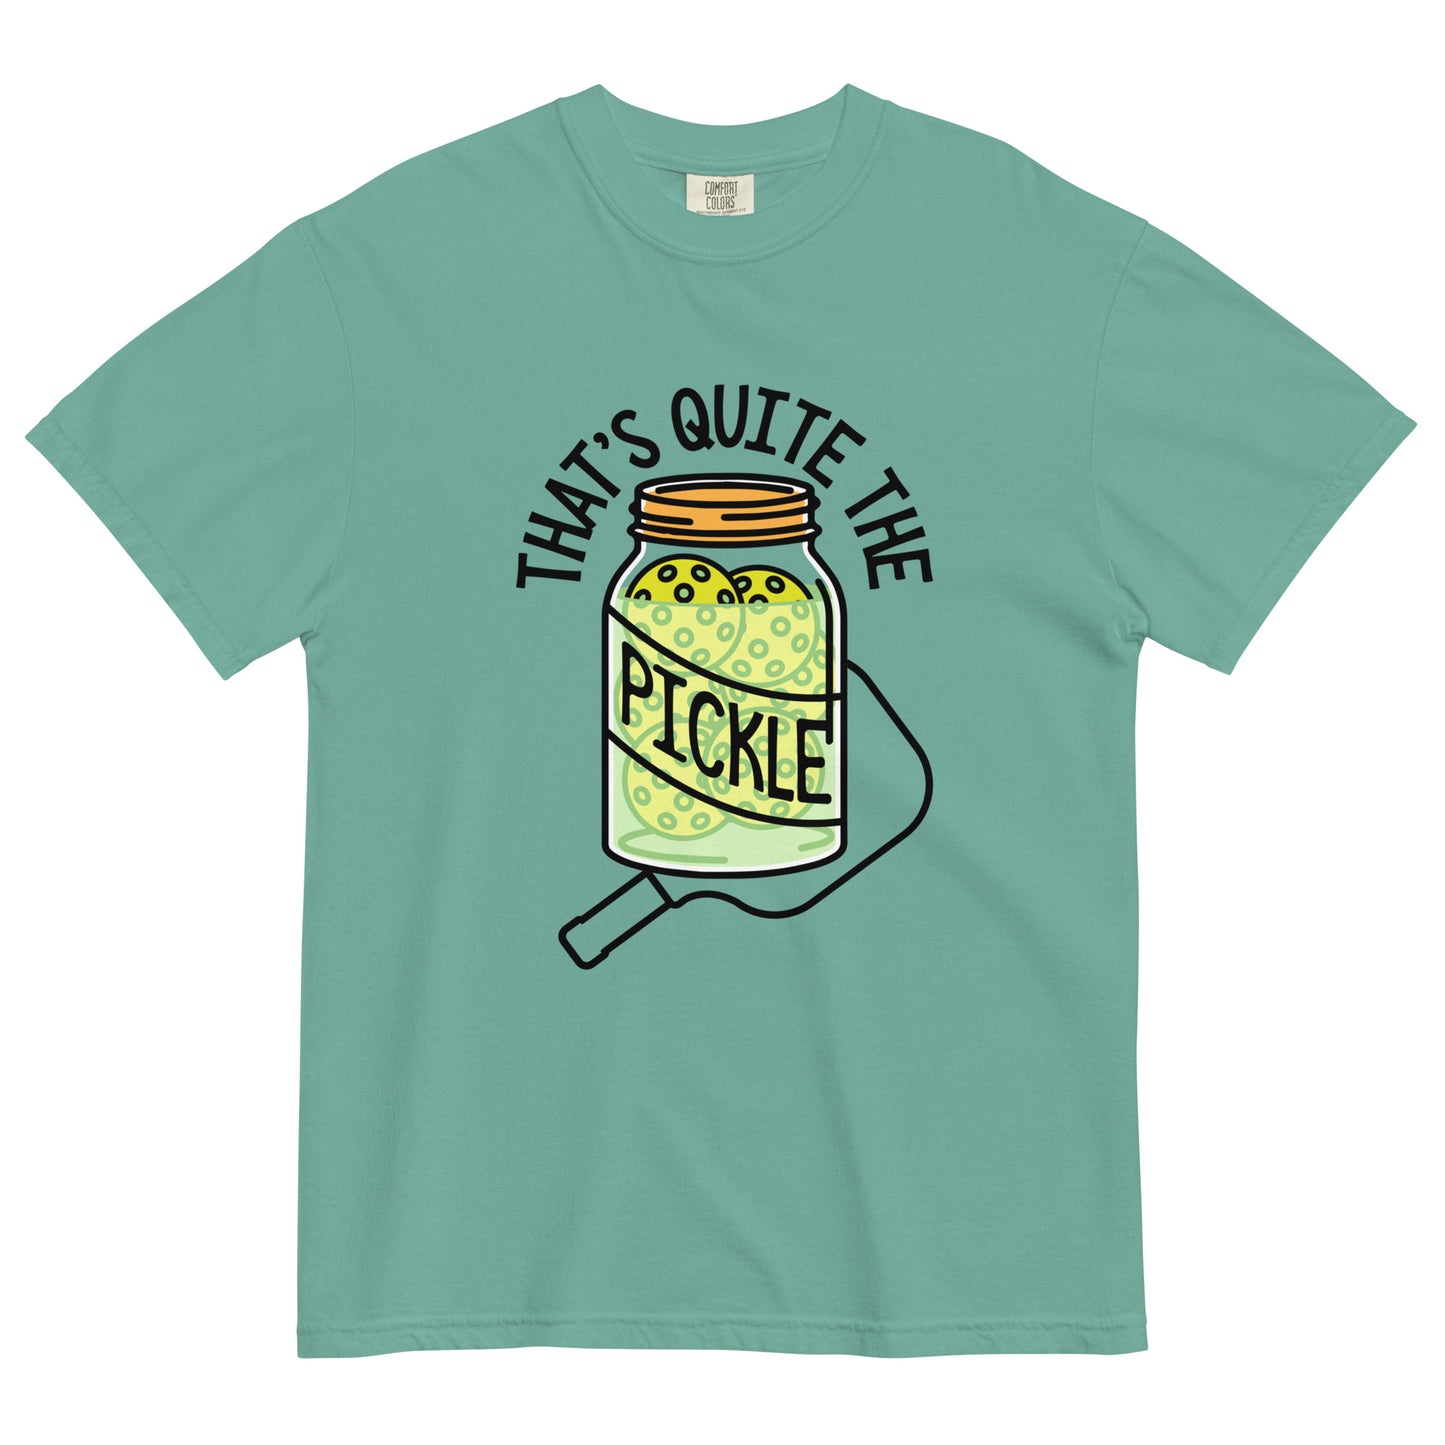 That's Quite The Pickle Men's Relaxed Fit Tee